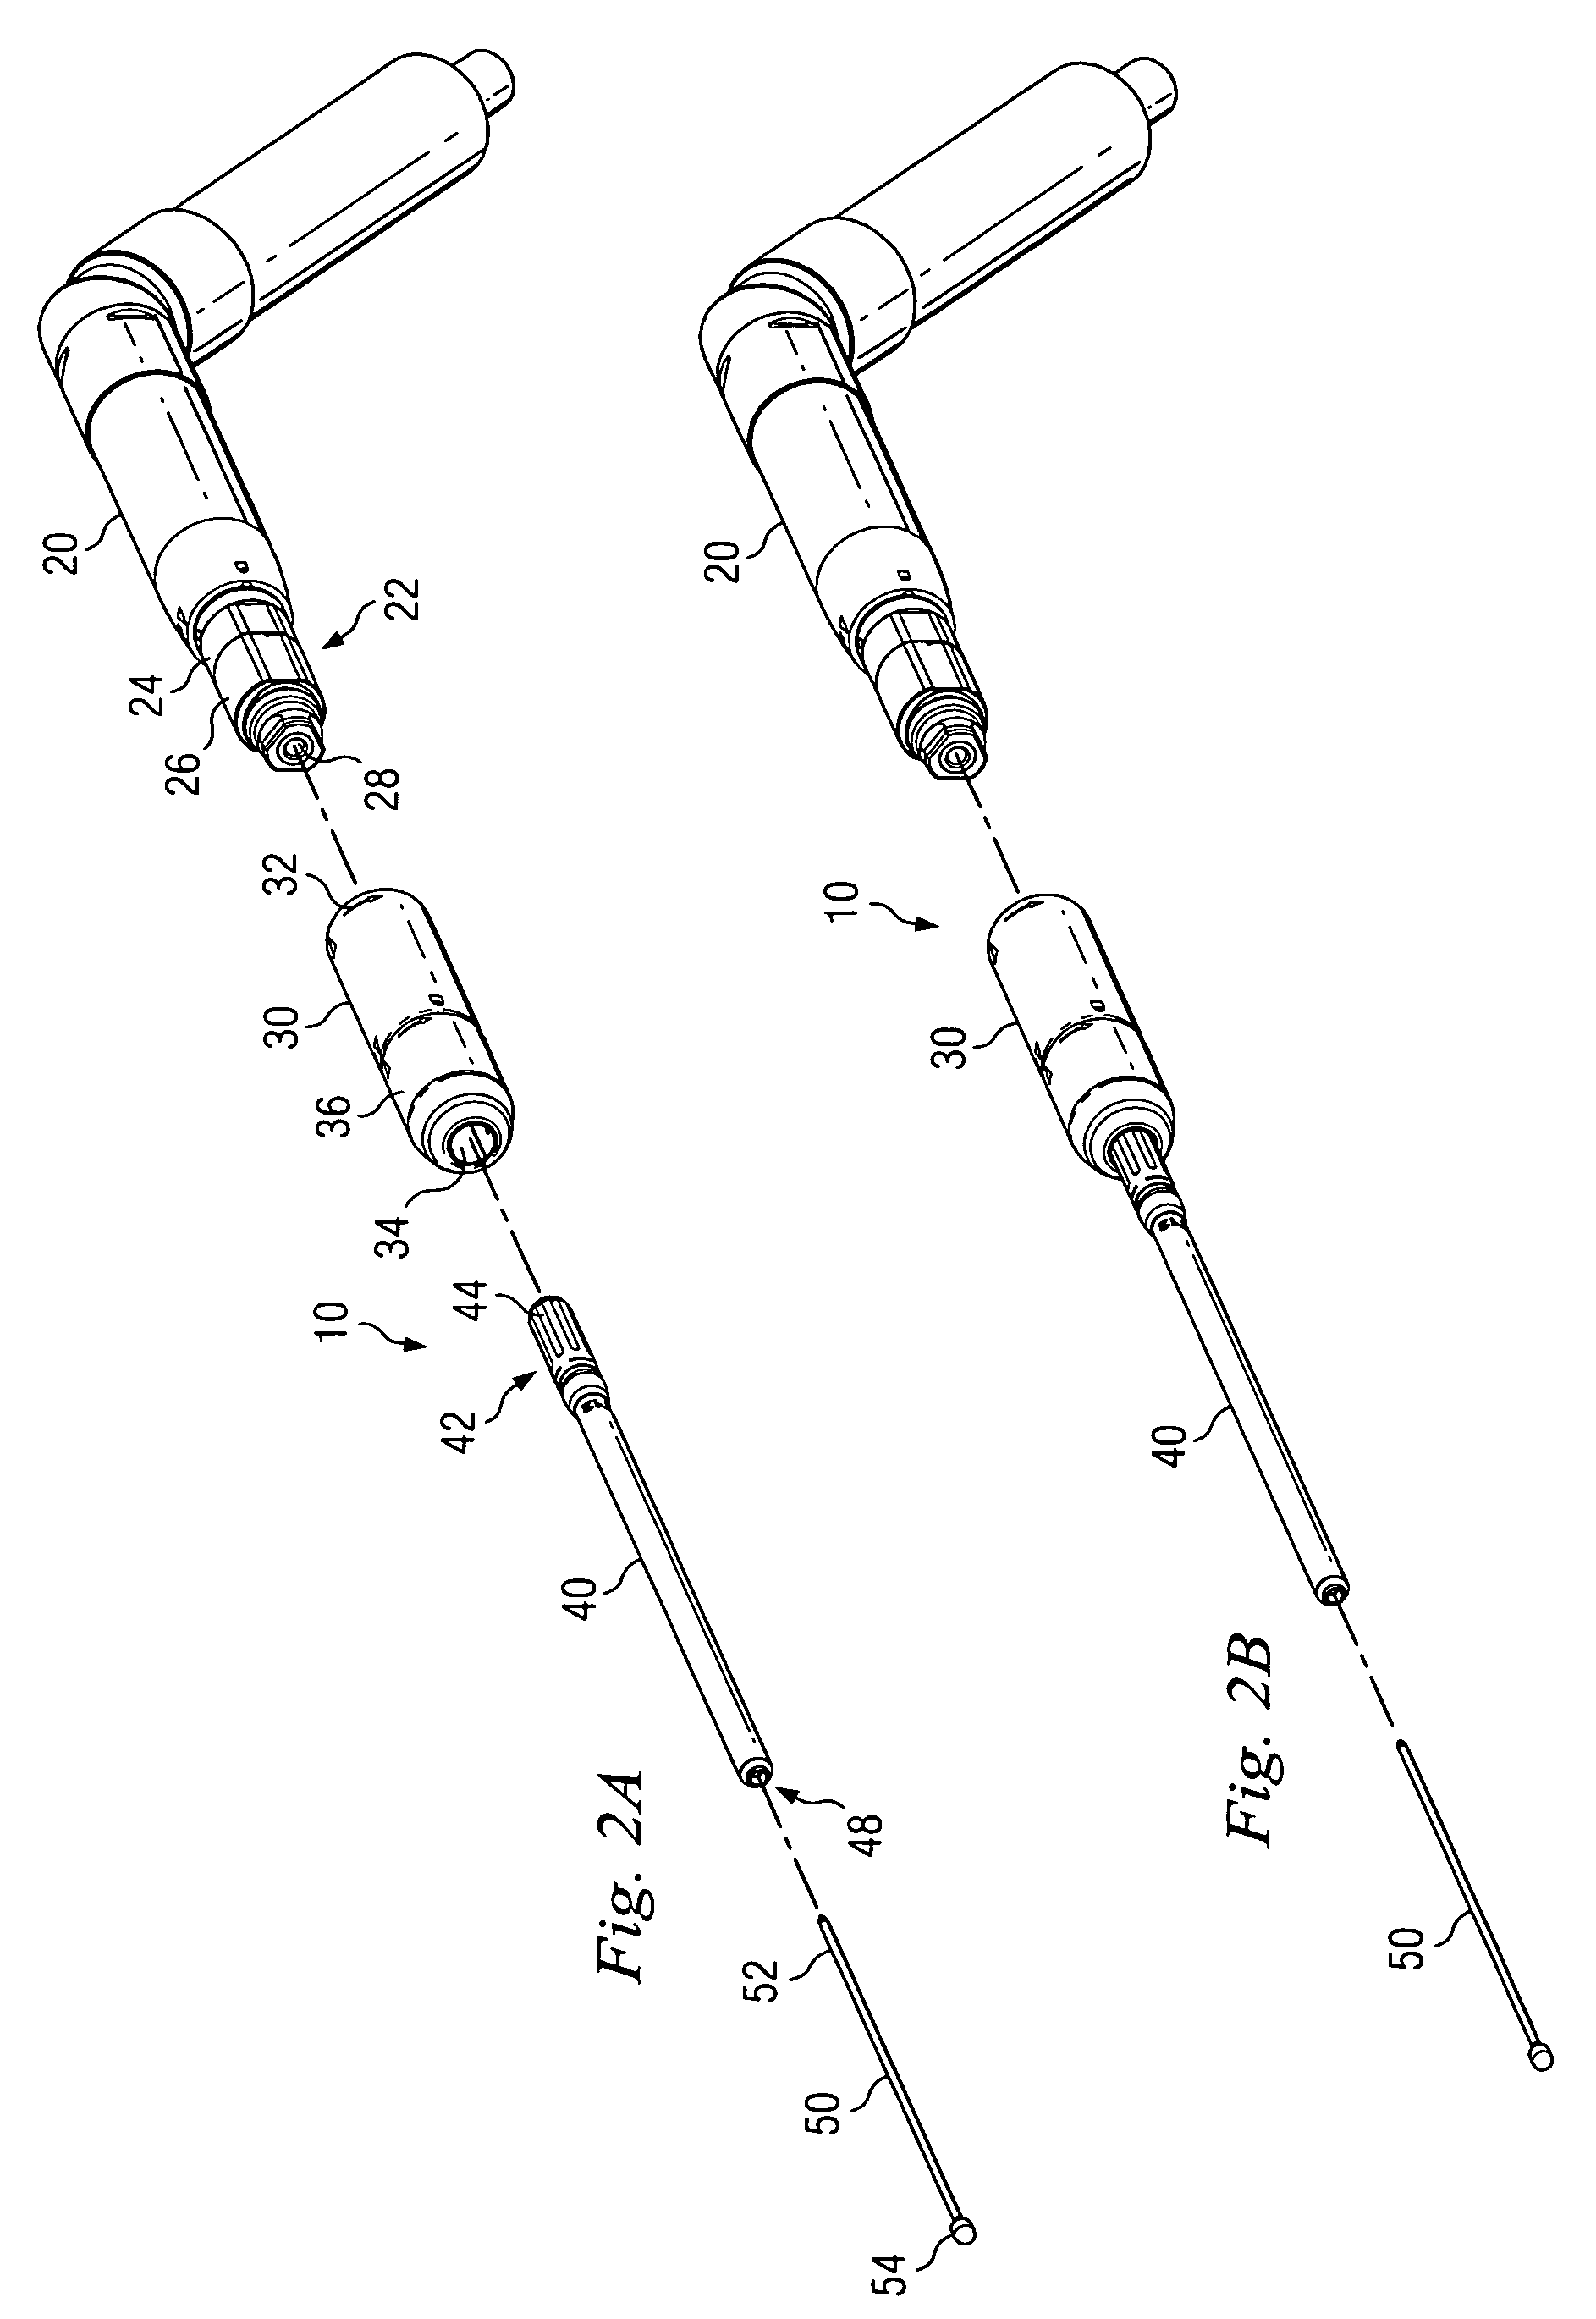 Surgical instrument with telescoping attachment